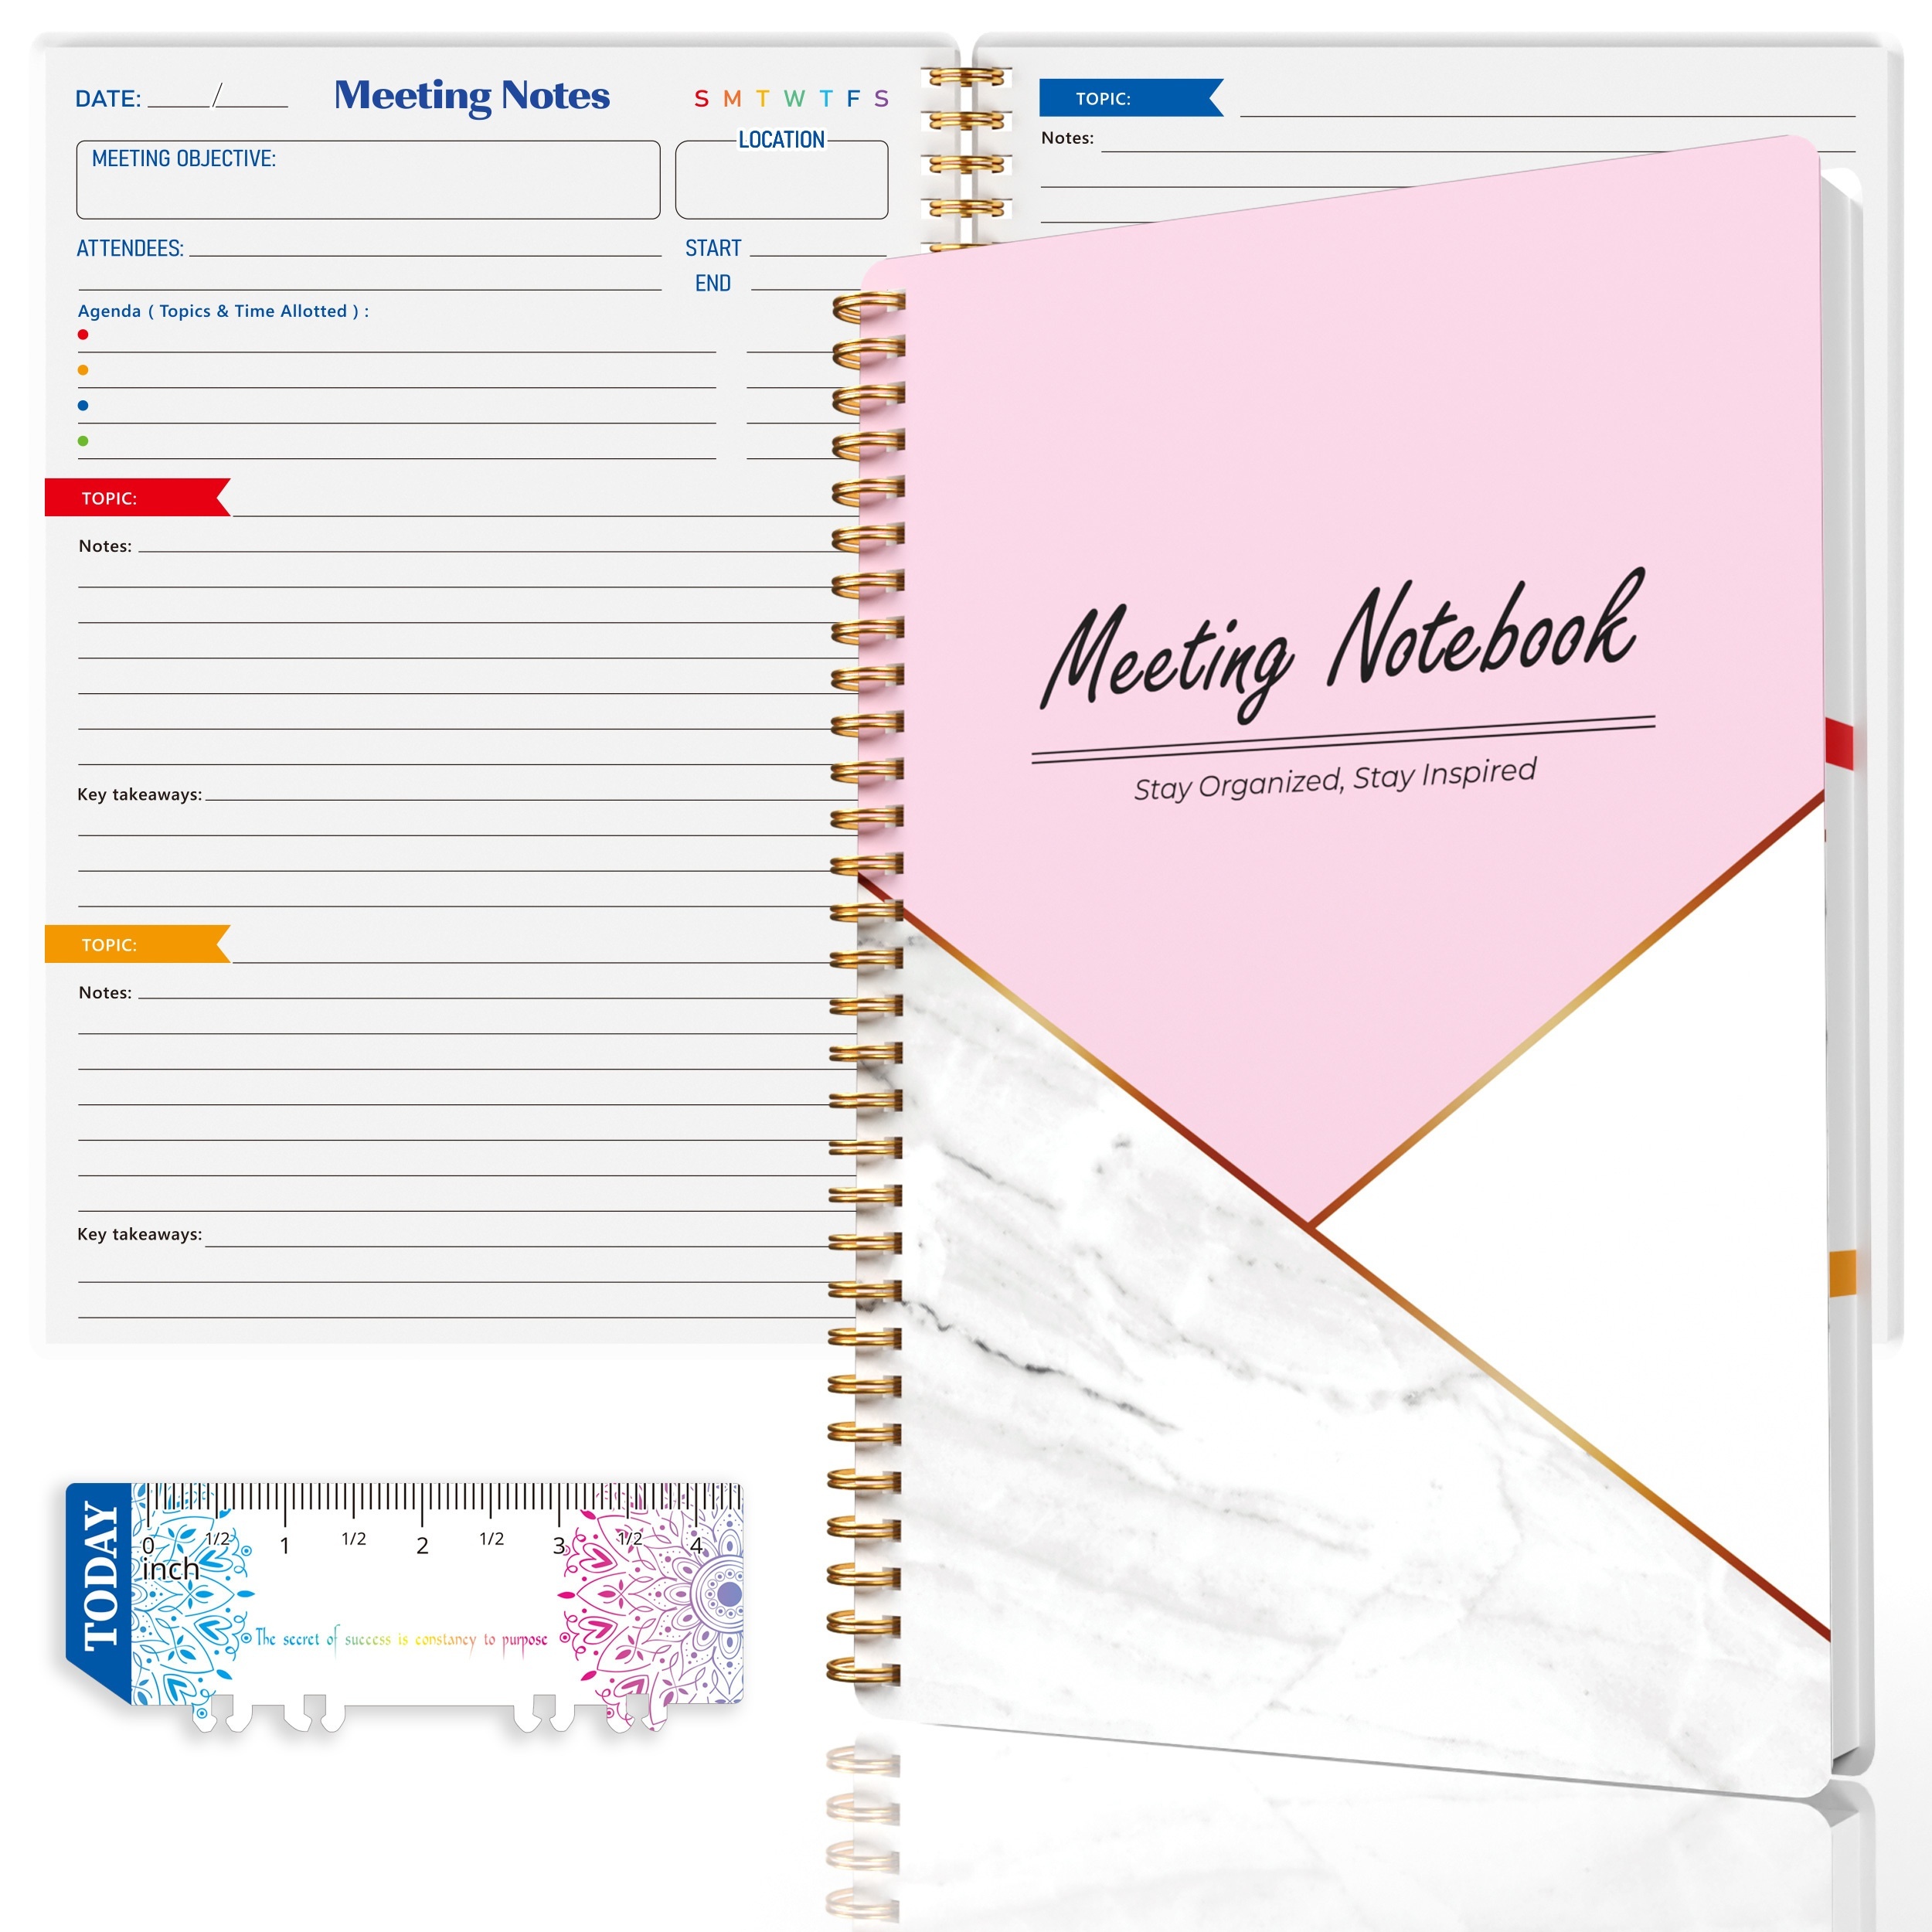 

1pc Efficient Meeting Notebook For Organized Work - Streamline Note-taking And Stay On Track With Agendas - Perfect Office Planning Tool For Professional Project Management, B5 (7x10in) - Pink Line